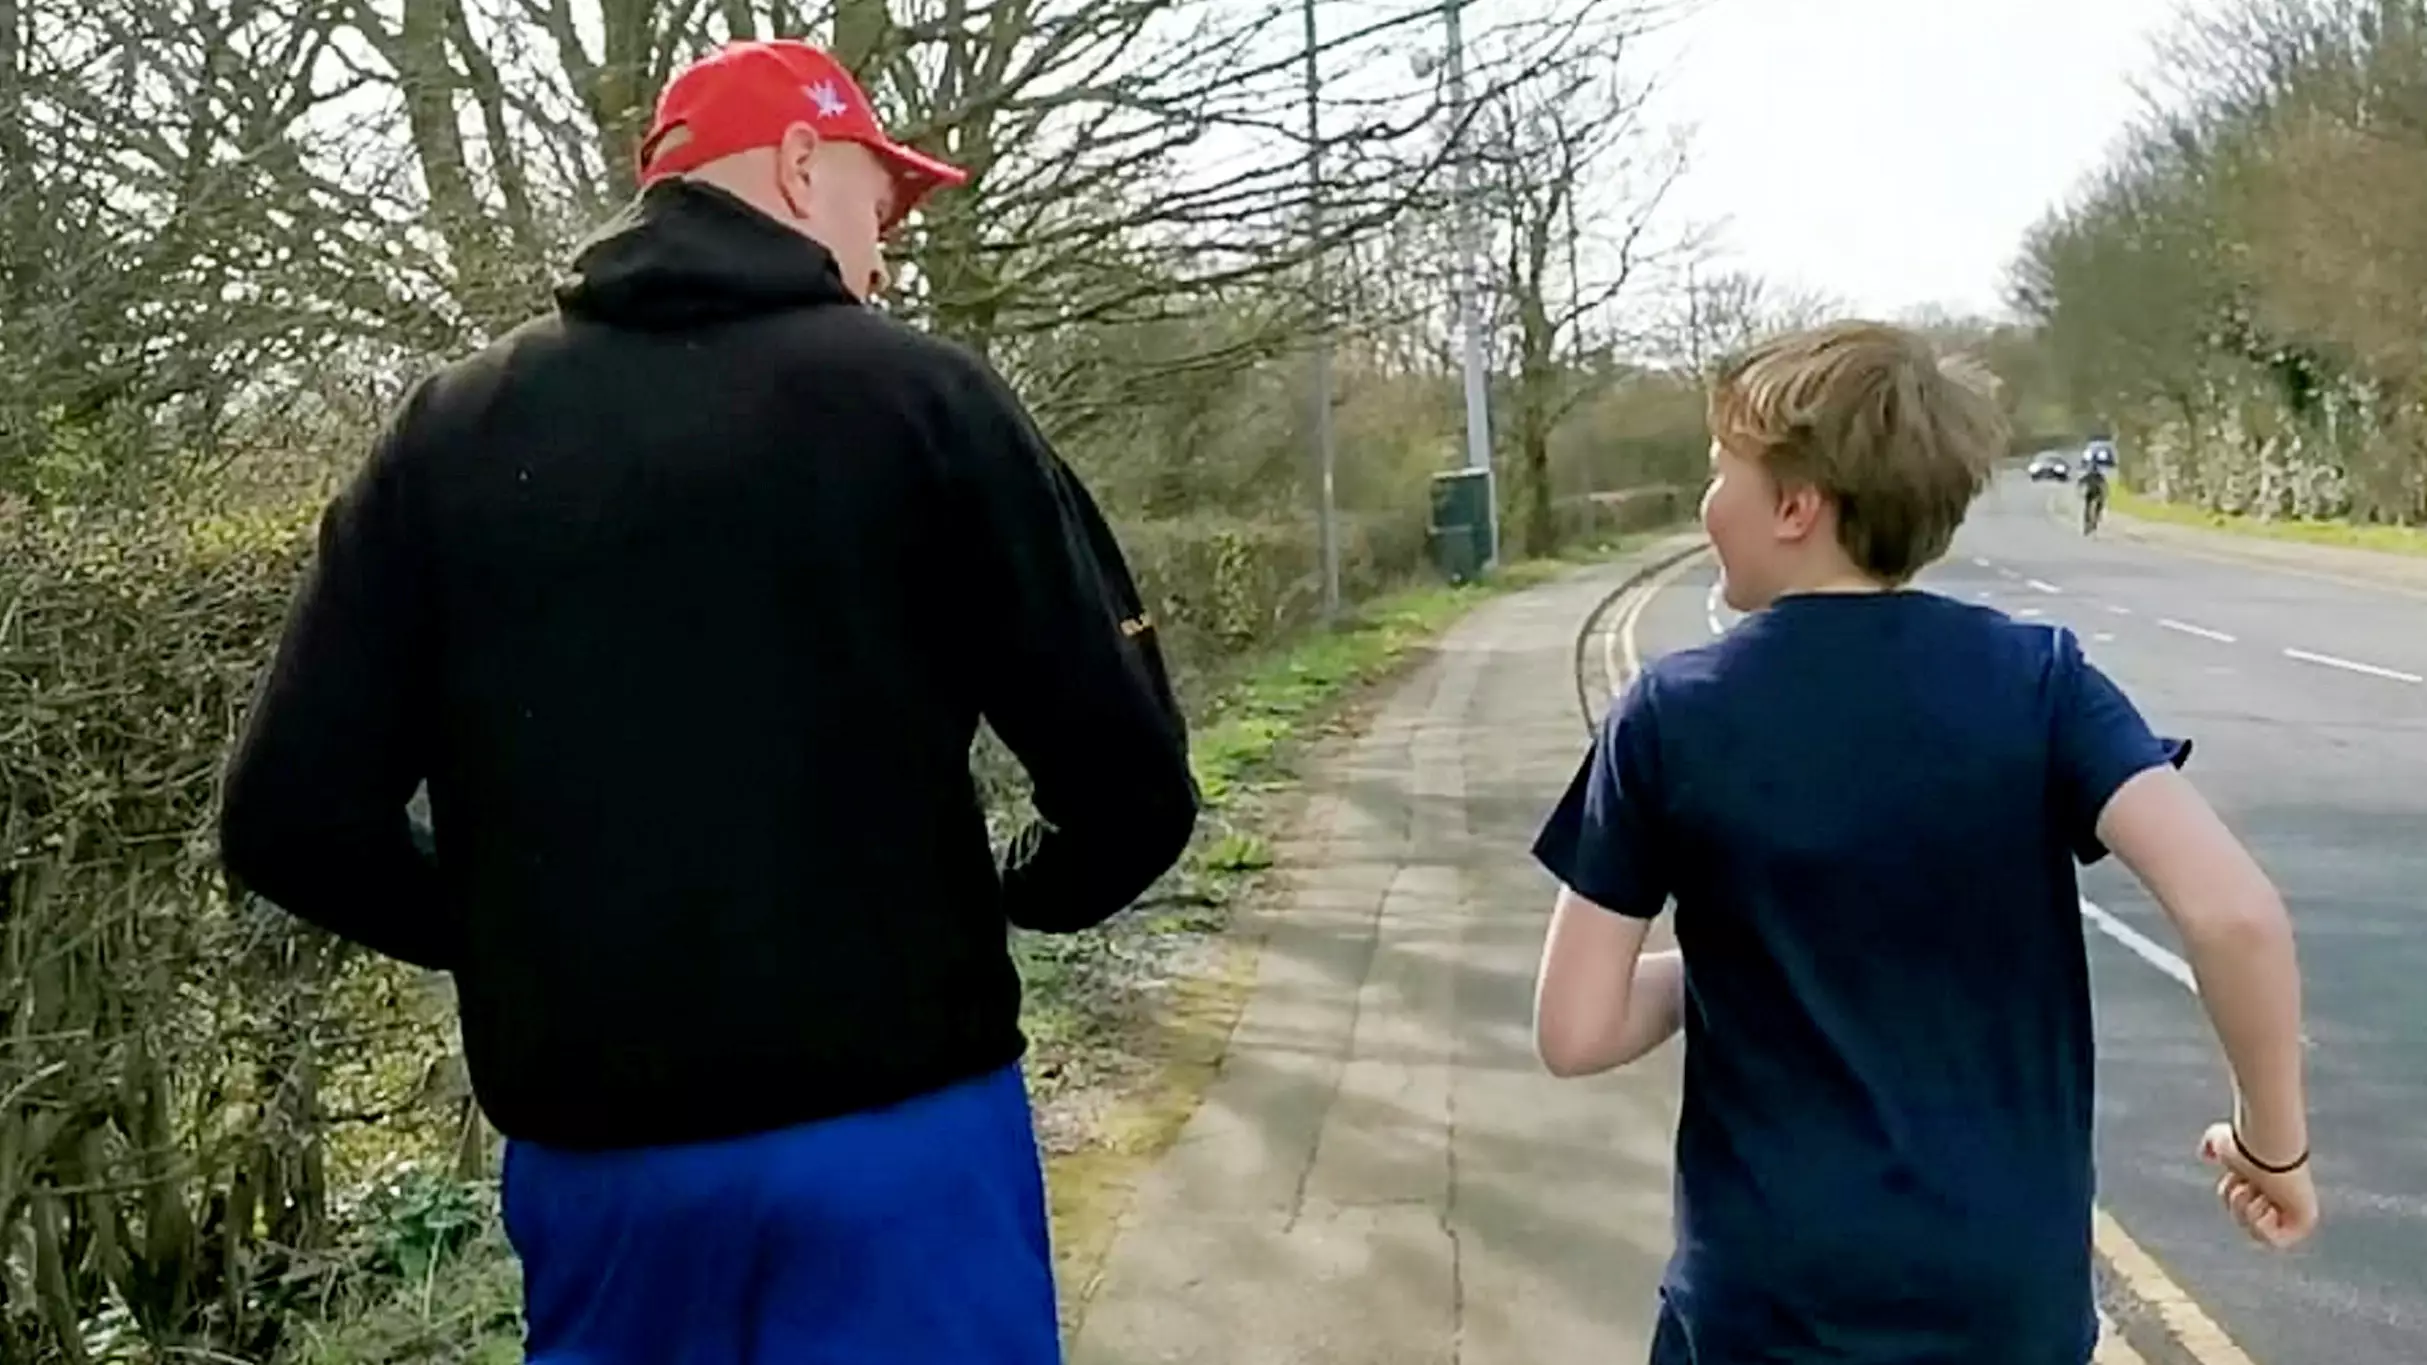 Tyson Fury Fan Wanting A Photo Ended Up Going On A Jog With Him